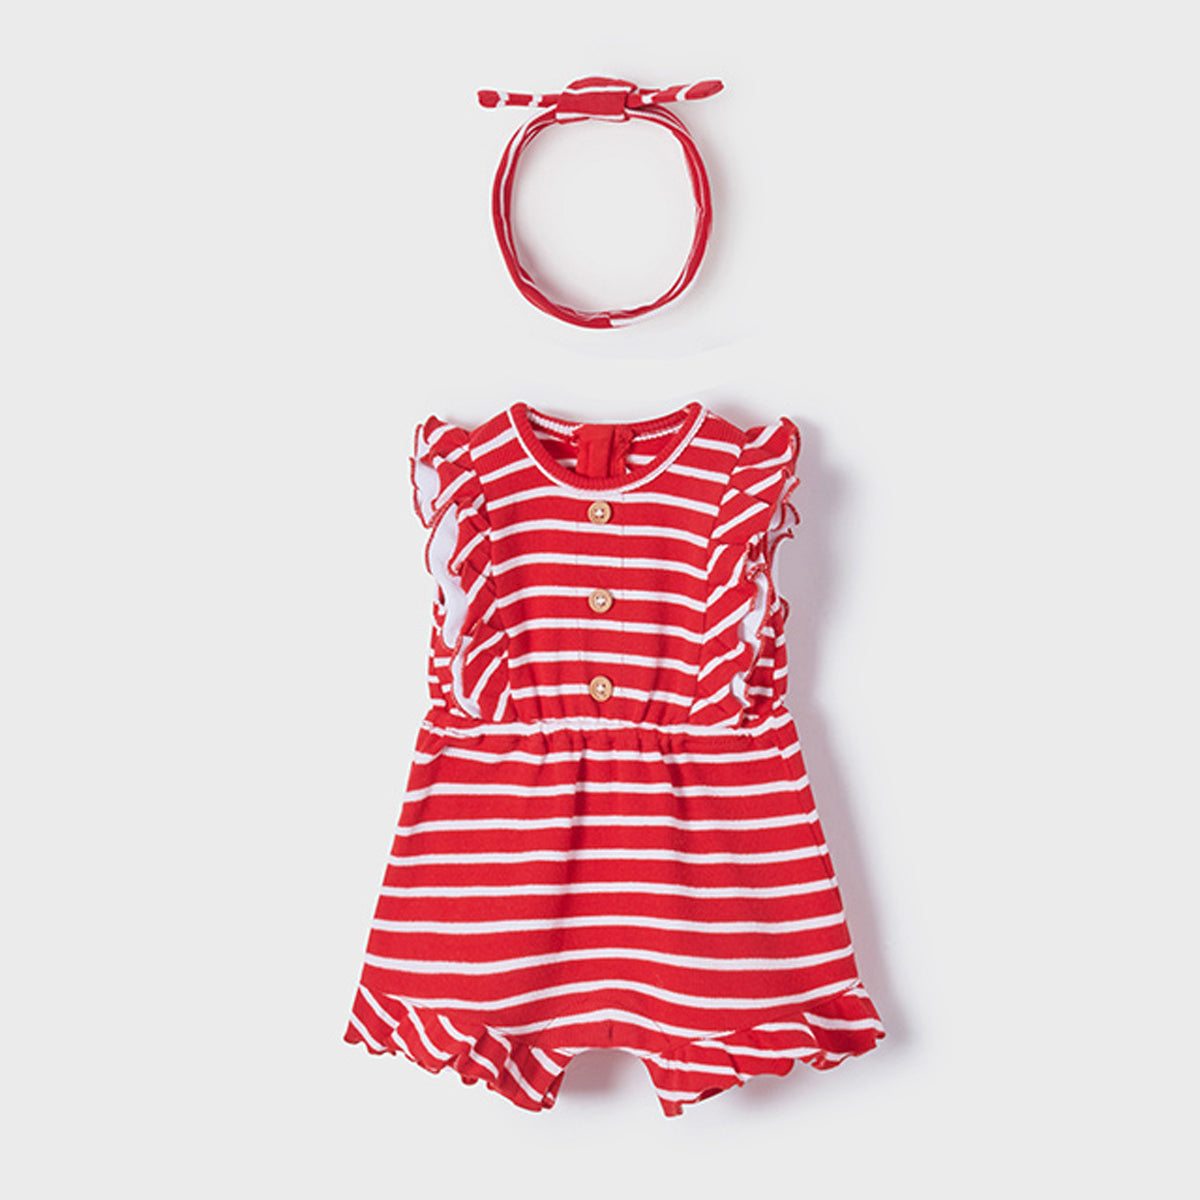 Red Knit Ecofriends Jumpsuit With Headband